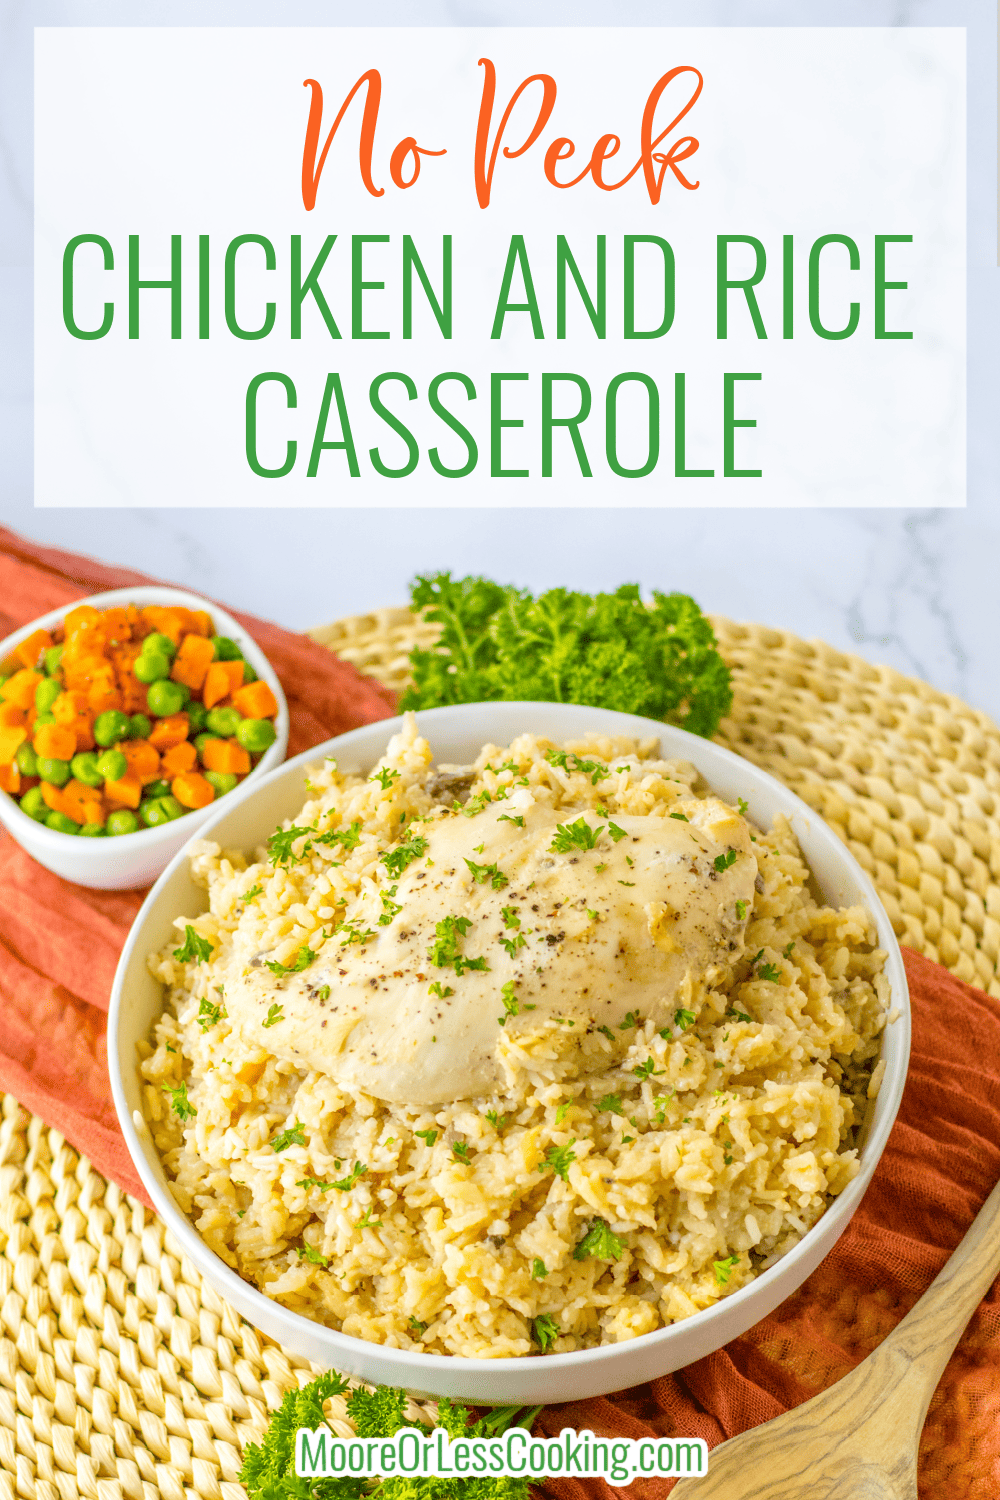 A handful of ingredients produces a savory chicken dinner full of fluffy rice and tender chicken snuggled in a rich sauce. Just stir together the ingredients, pour them into the casserole dish, layer on the chicken, cover, and bake. via @Mooreorlesscook